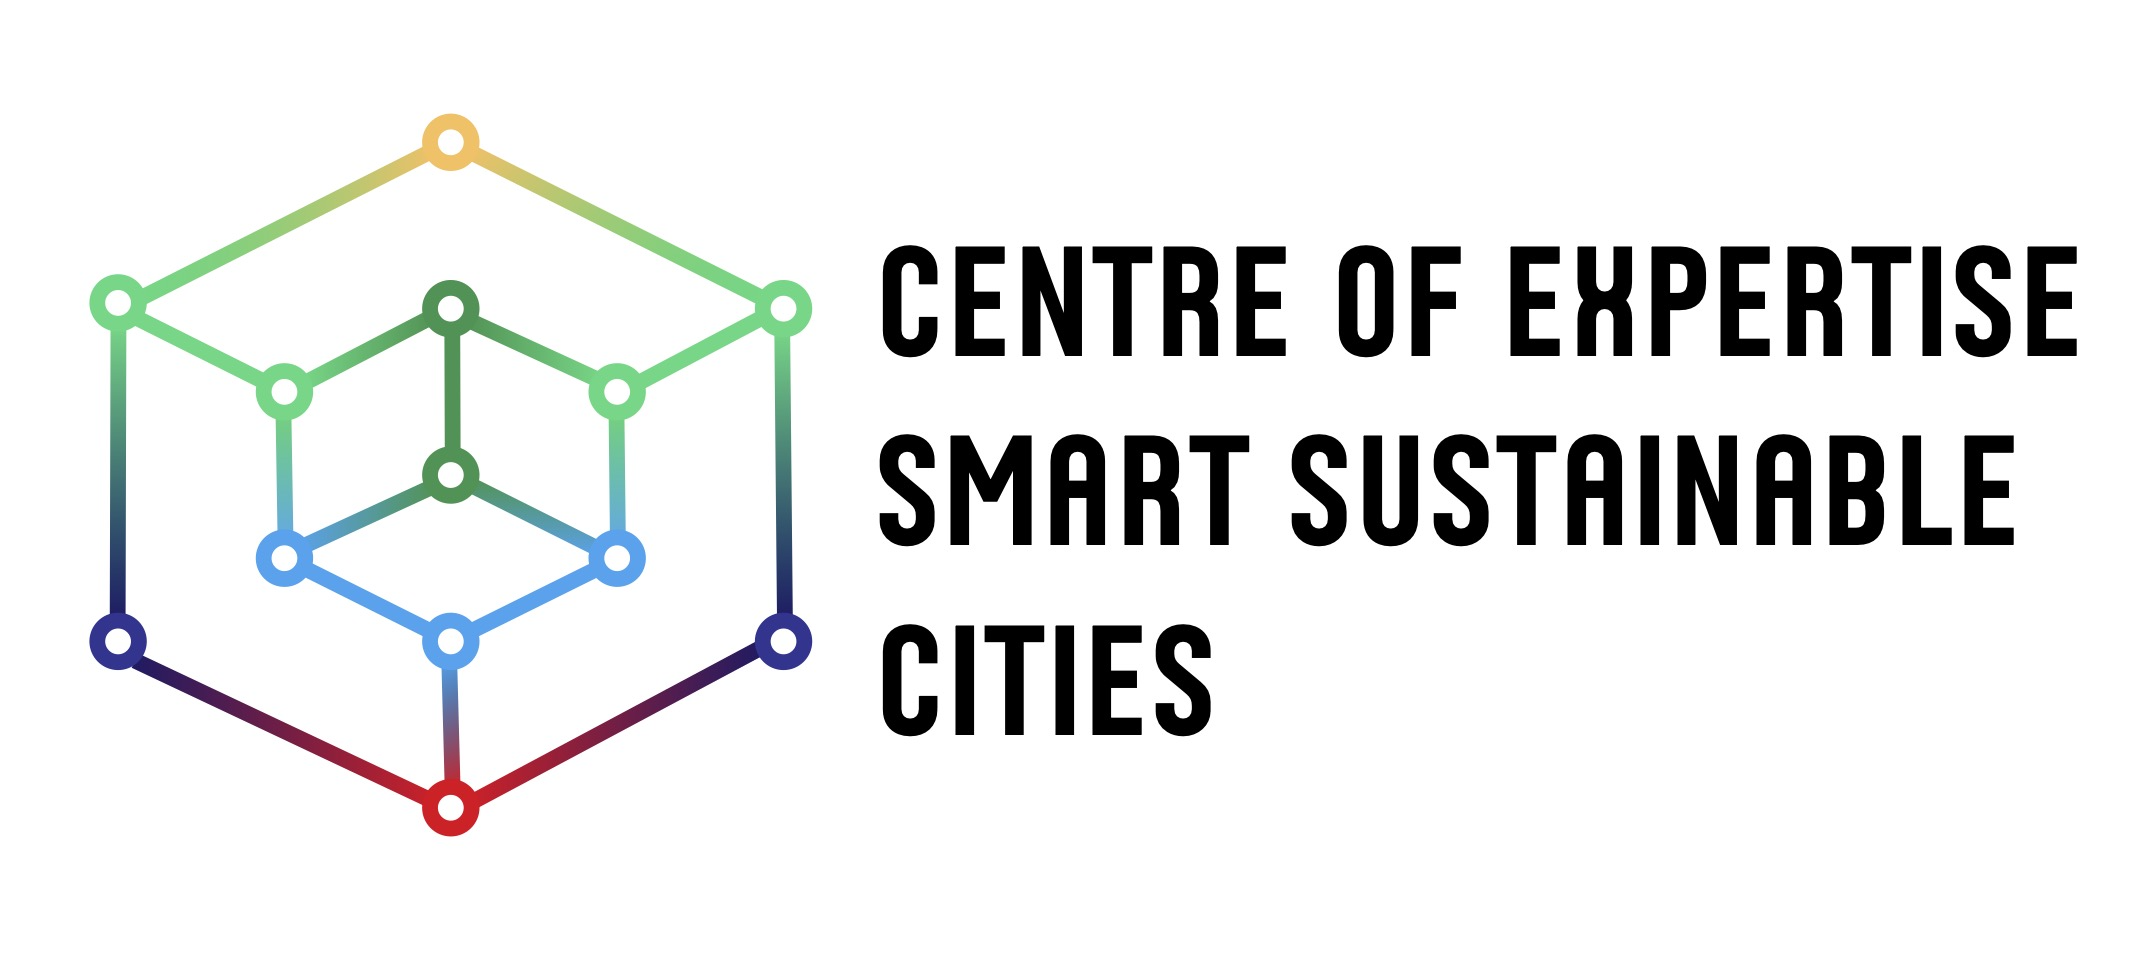 Centre of expertise Smart Sustainable Cities logo